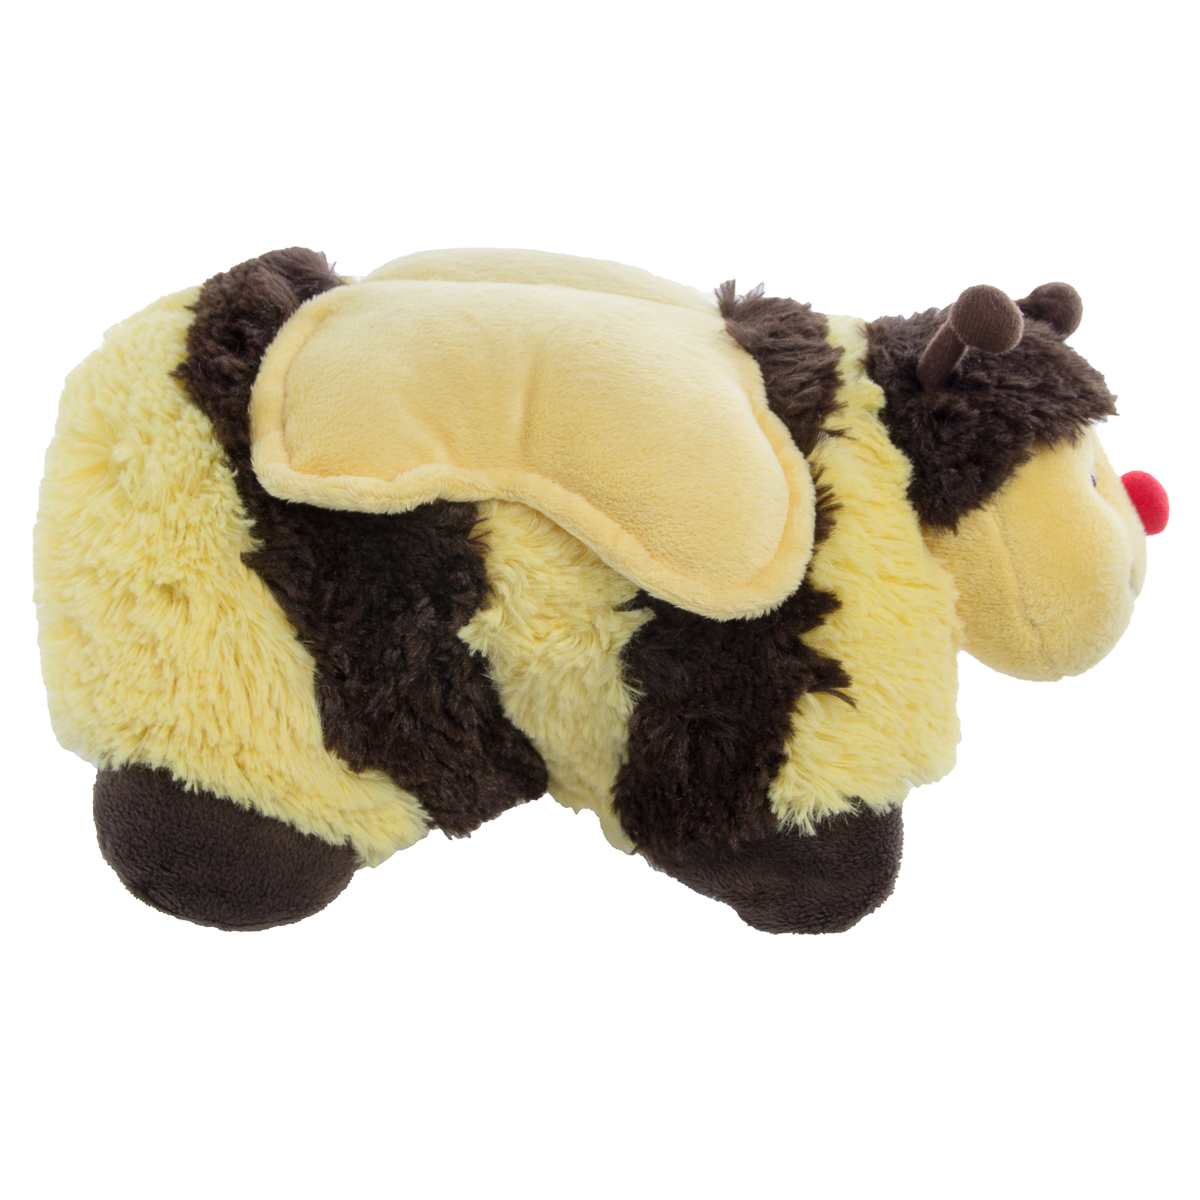 Pillow Pets Pee Wee 11 Inch Super Soft Stuffed Animal Pillow For Kids Toddlers Babies Cute Plush Toys - image 3 of 3